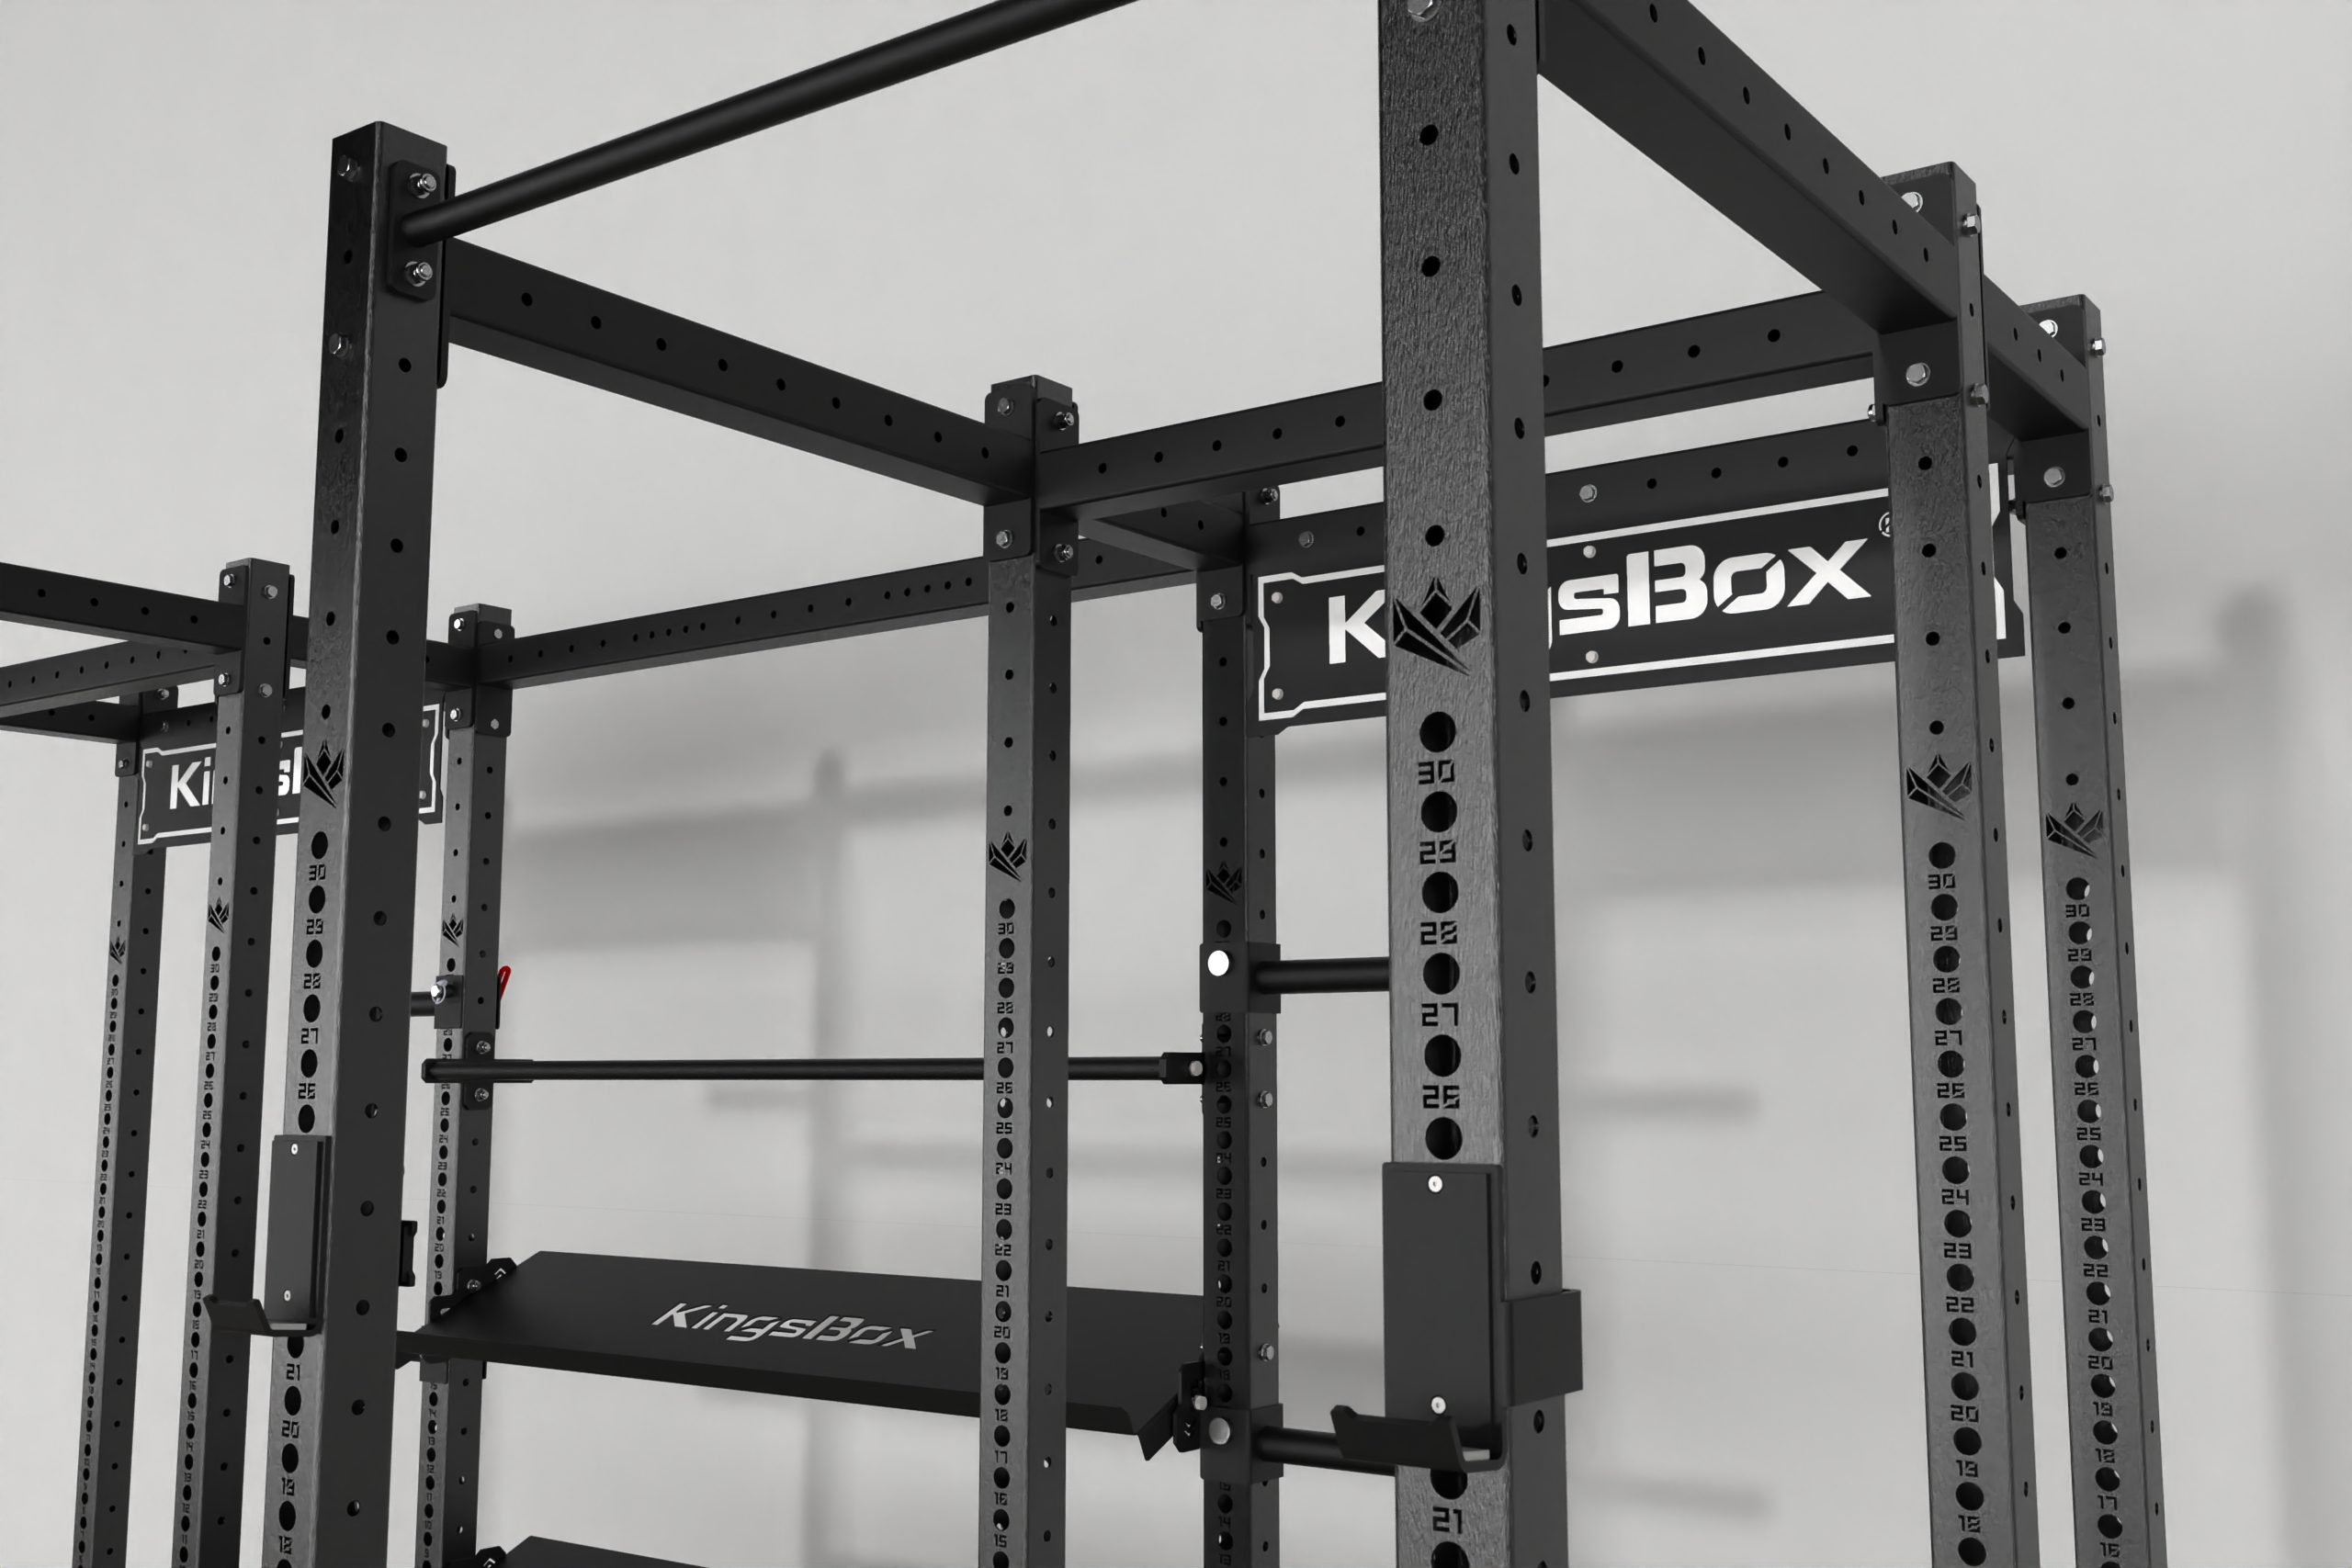 Double Mighty Power Rack CX-37 with storage | KingsBox